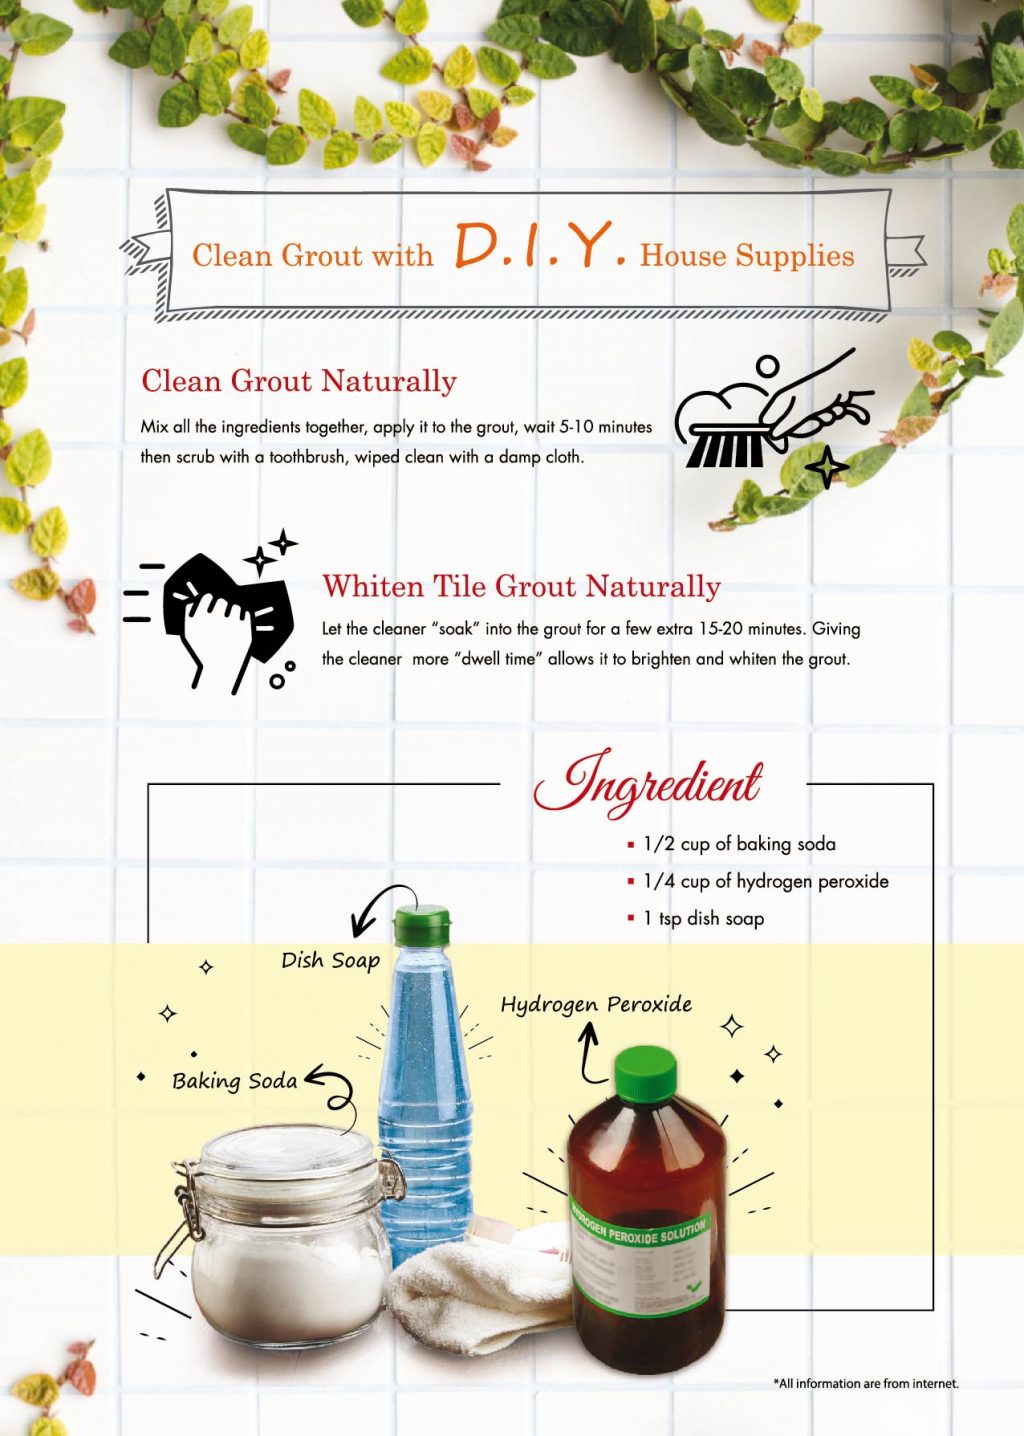 Clean Gout with DIY house supplies